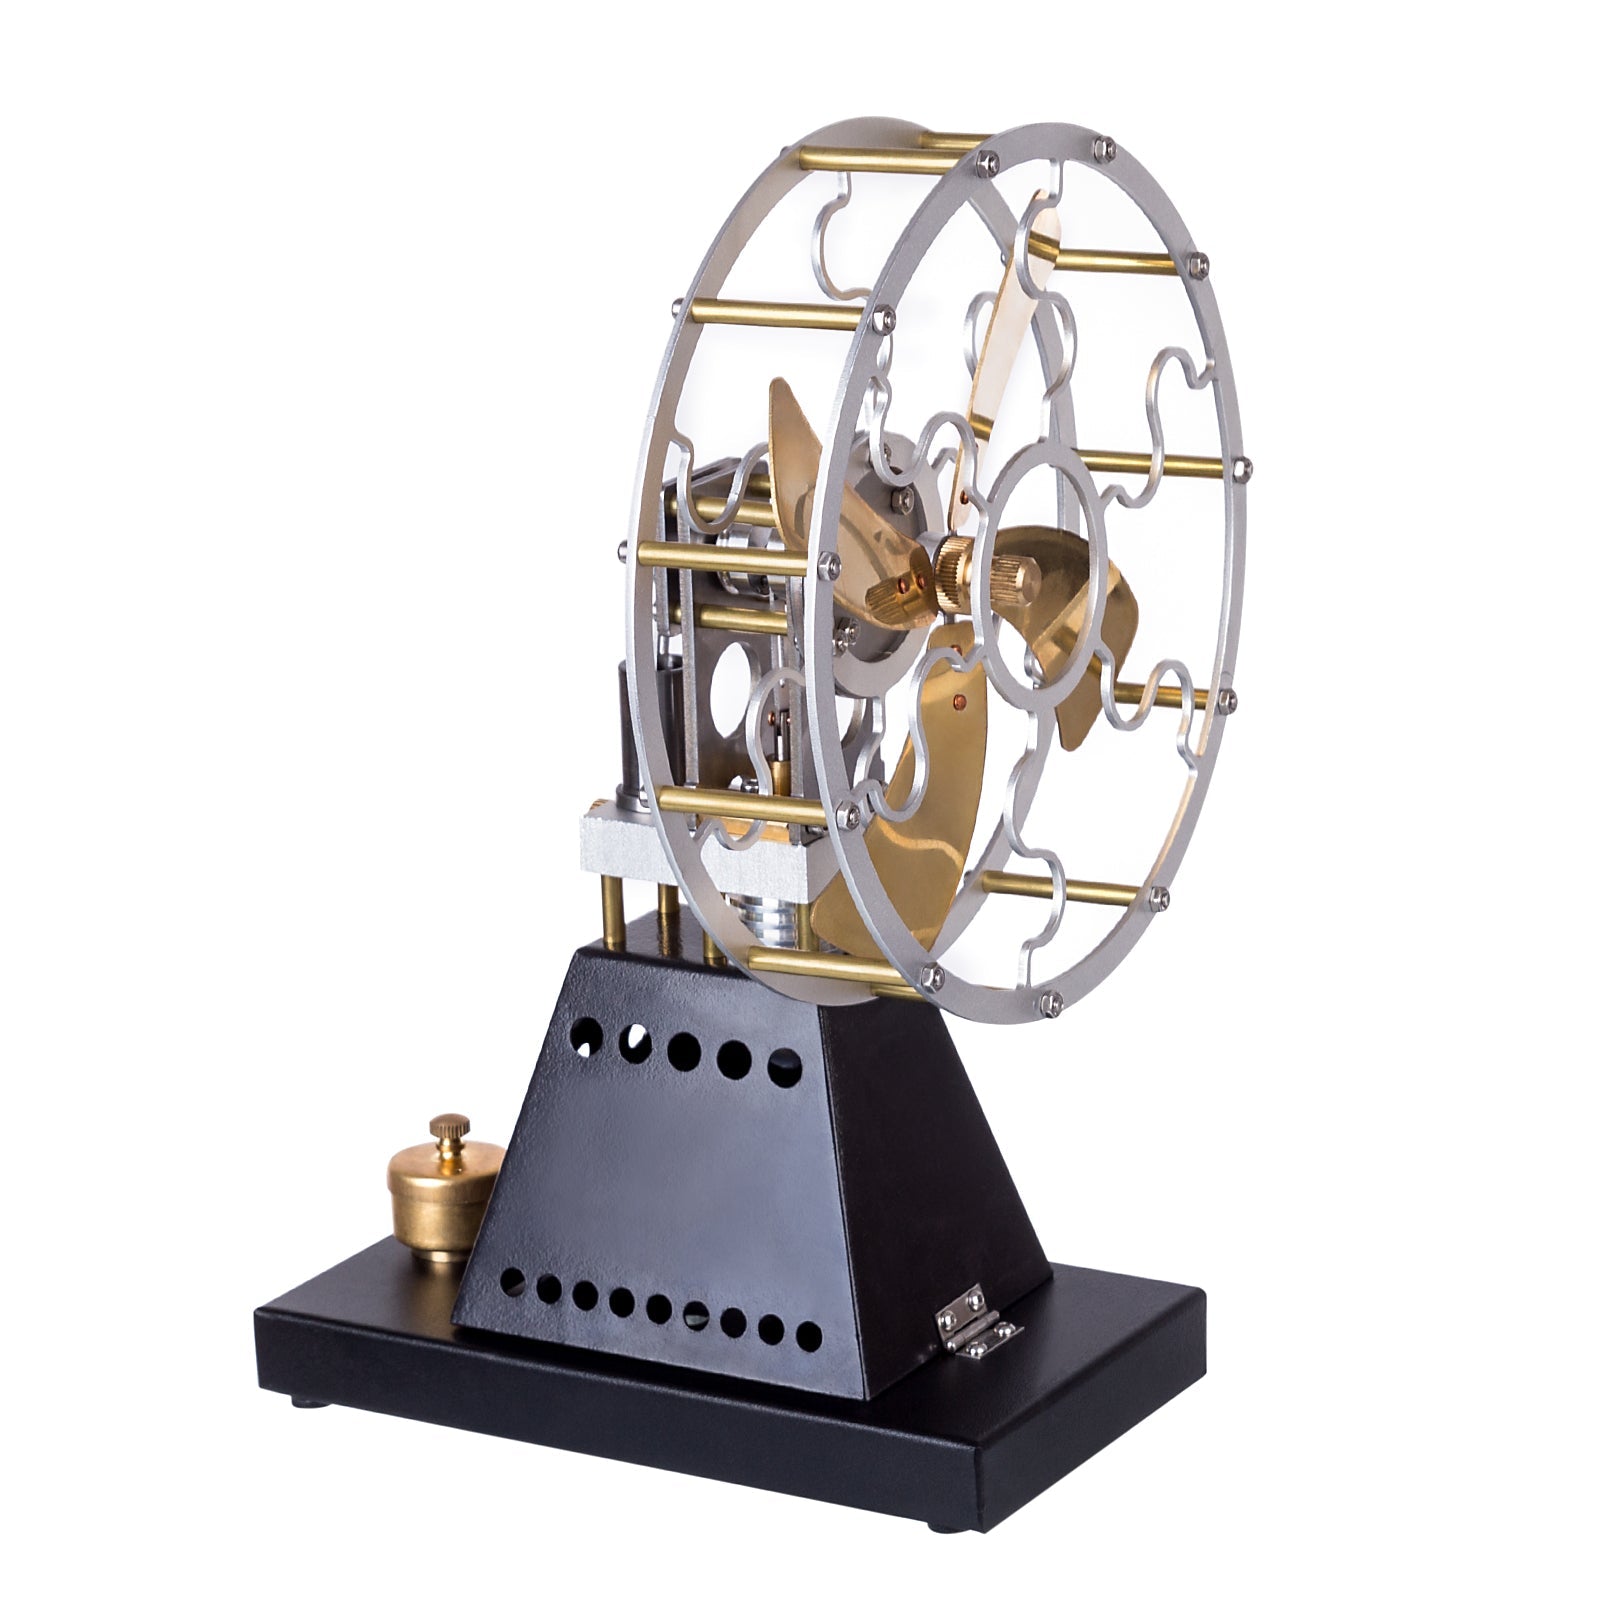 Thermal Power Stove Fan Vintage Stirling Engine Physics Science Experiment Energy Education Tool enginediyshop